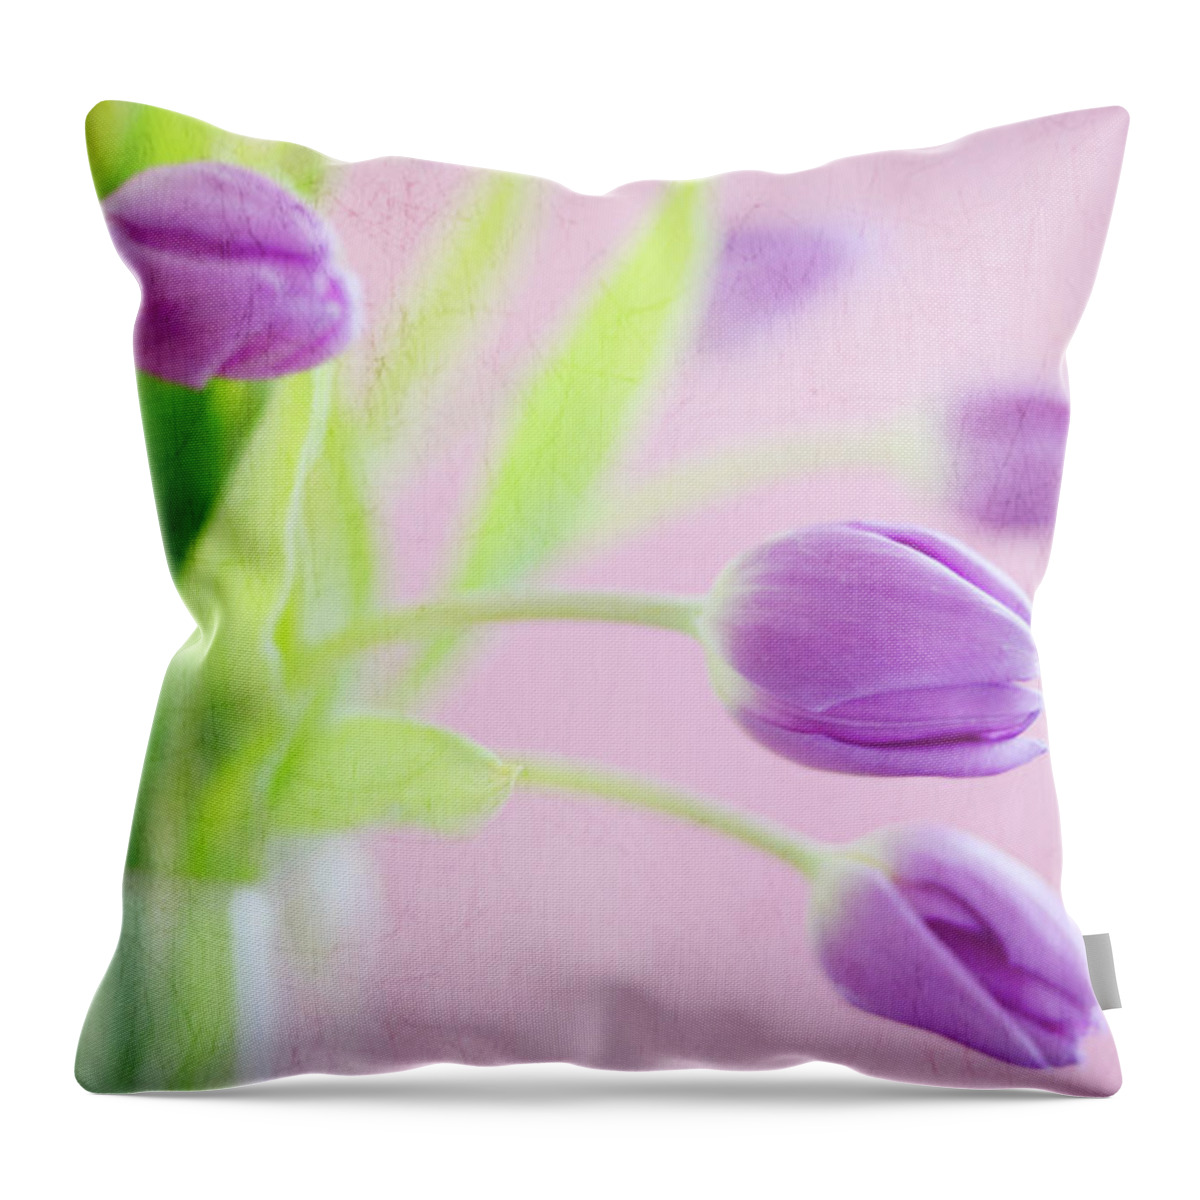 Vase Throw Pillow featuring the photograph Close Up Of Purple Tulips by Dhmig Photography